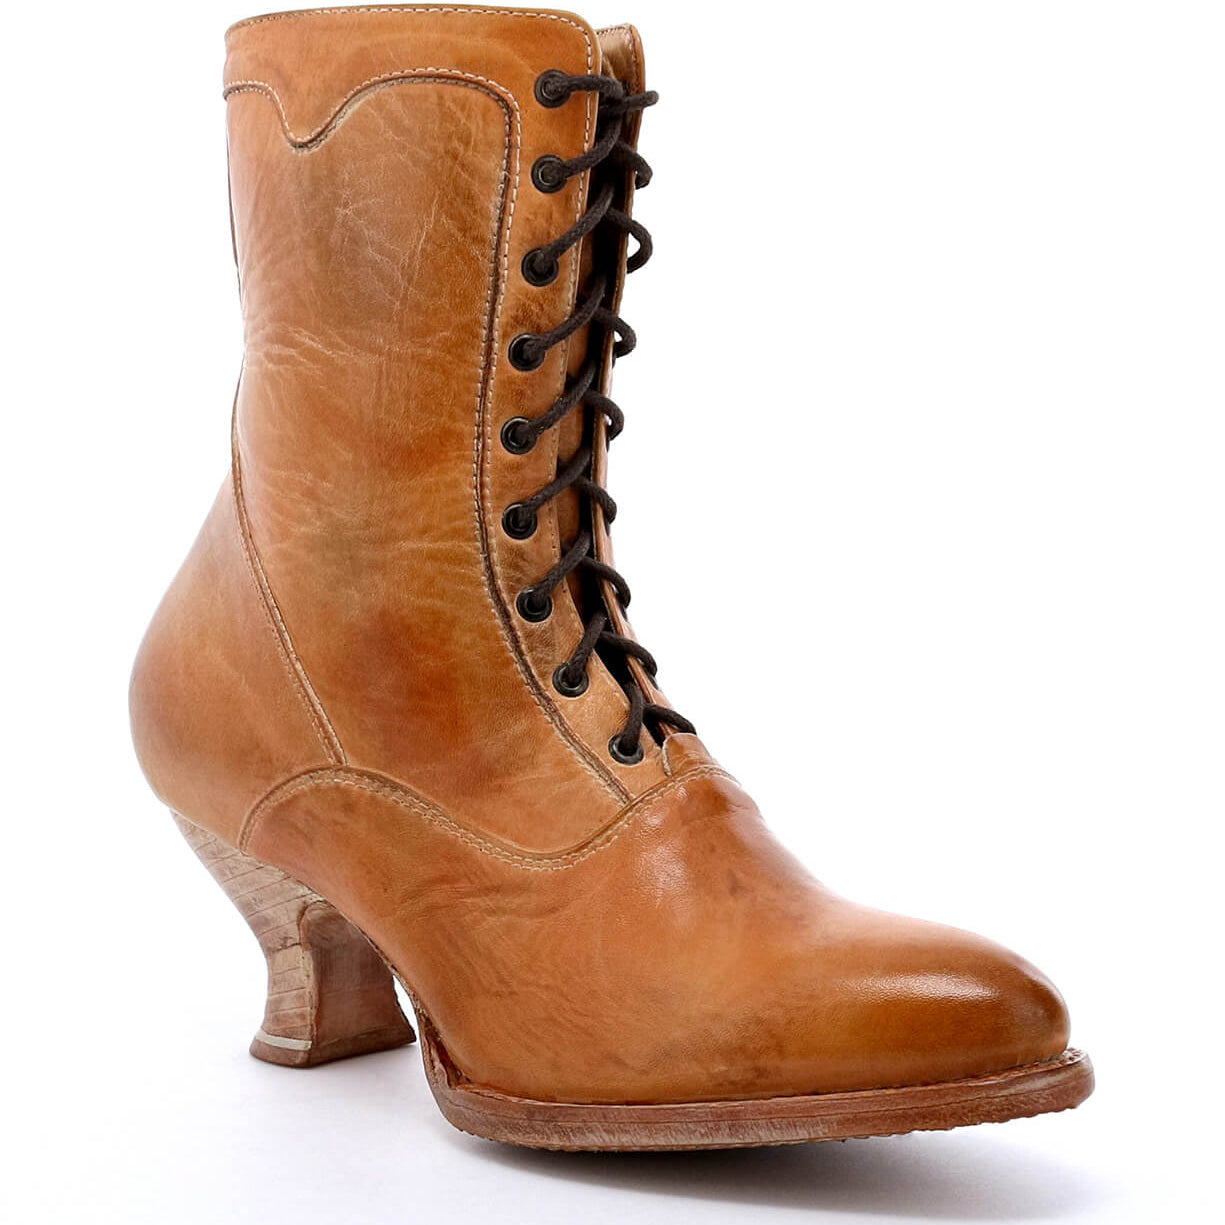 An Eleanor women's hand-dyed tan leather boot with laces, combining Victorian style and uncompromising quality from Oak Tree Farms.